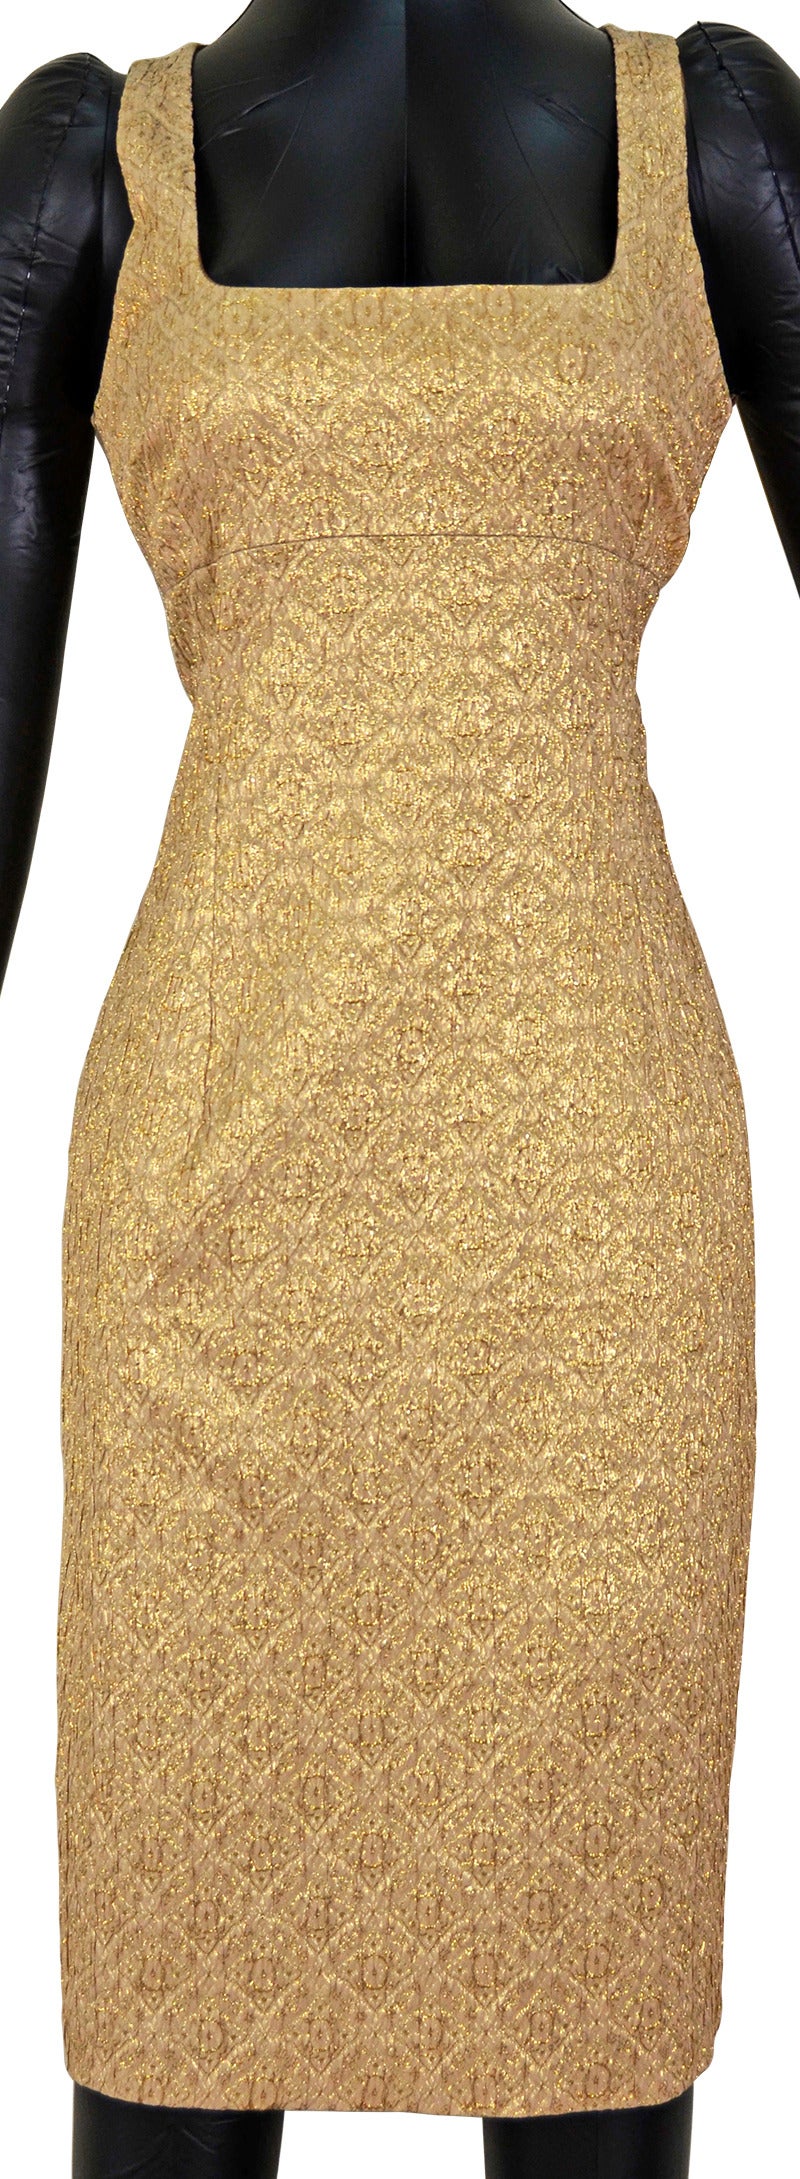 Gorgeous Michael Kors Otaluan made ensemble. Gold dress and matching fiat, size 8. In excellent condition. Perfect for that special occasion, any time of year.